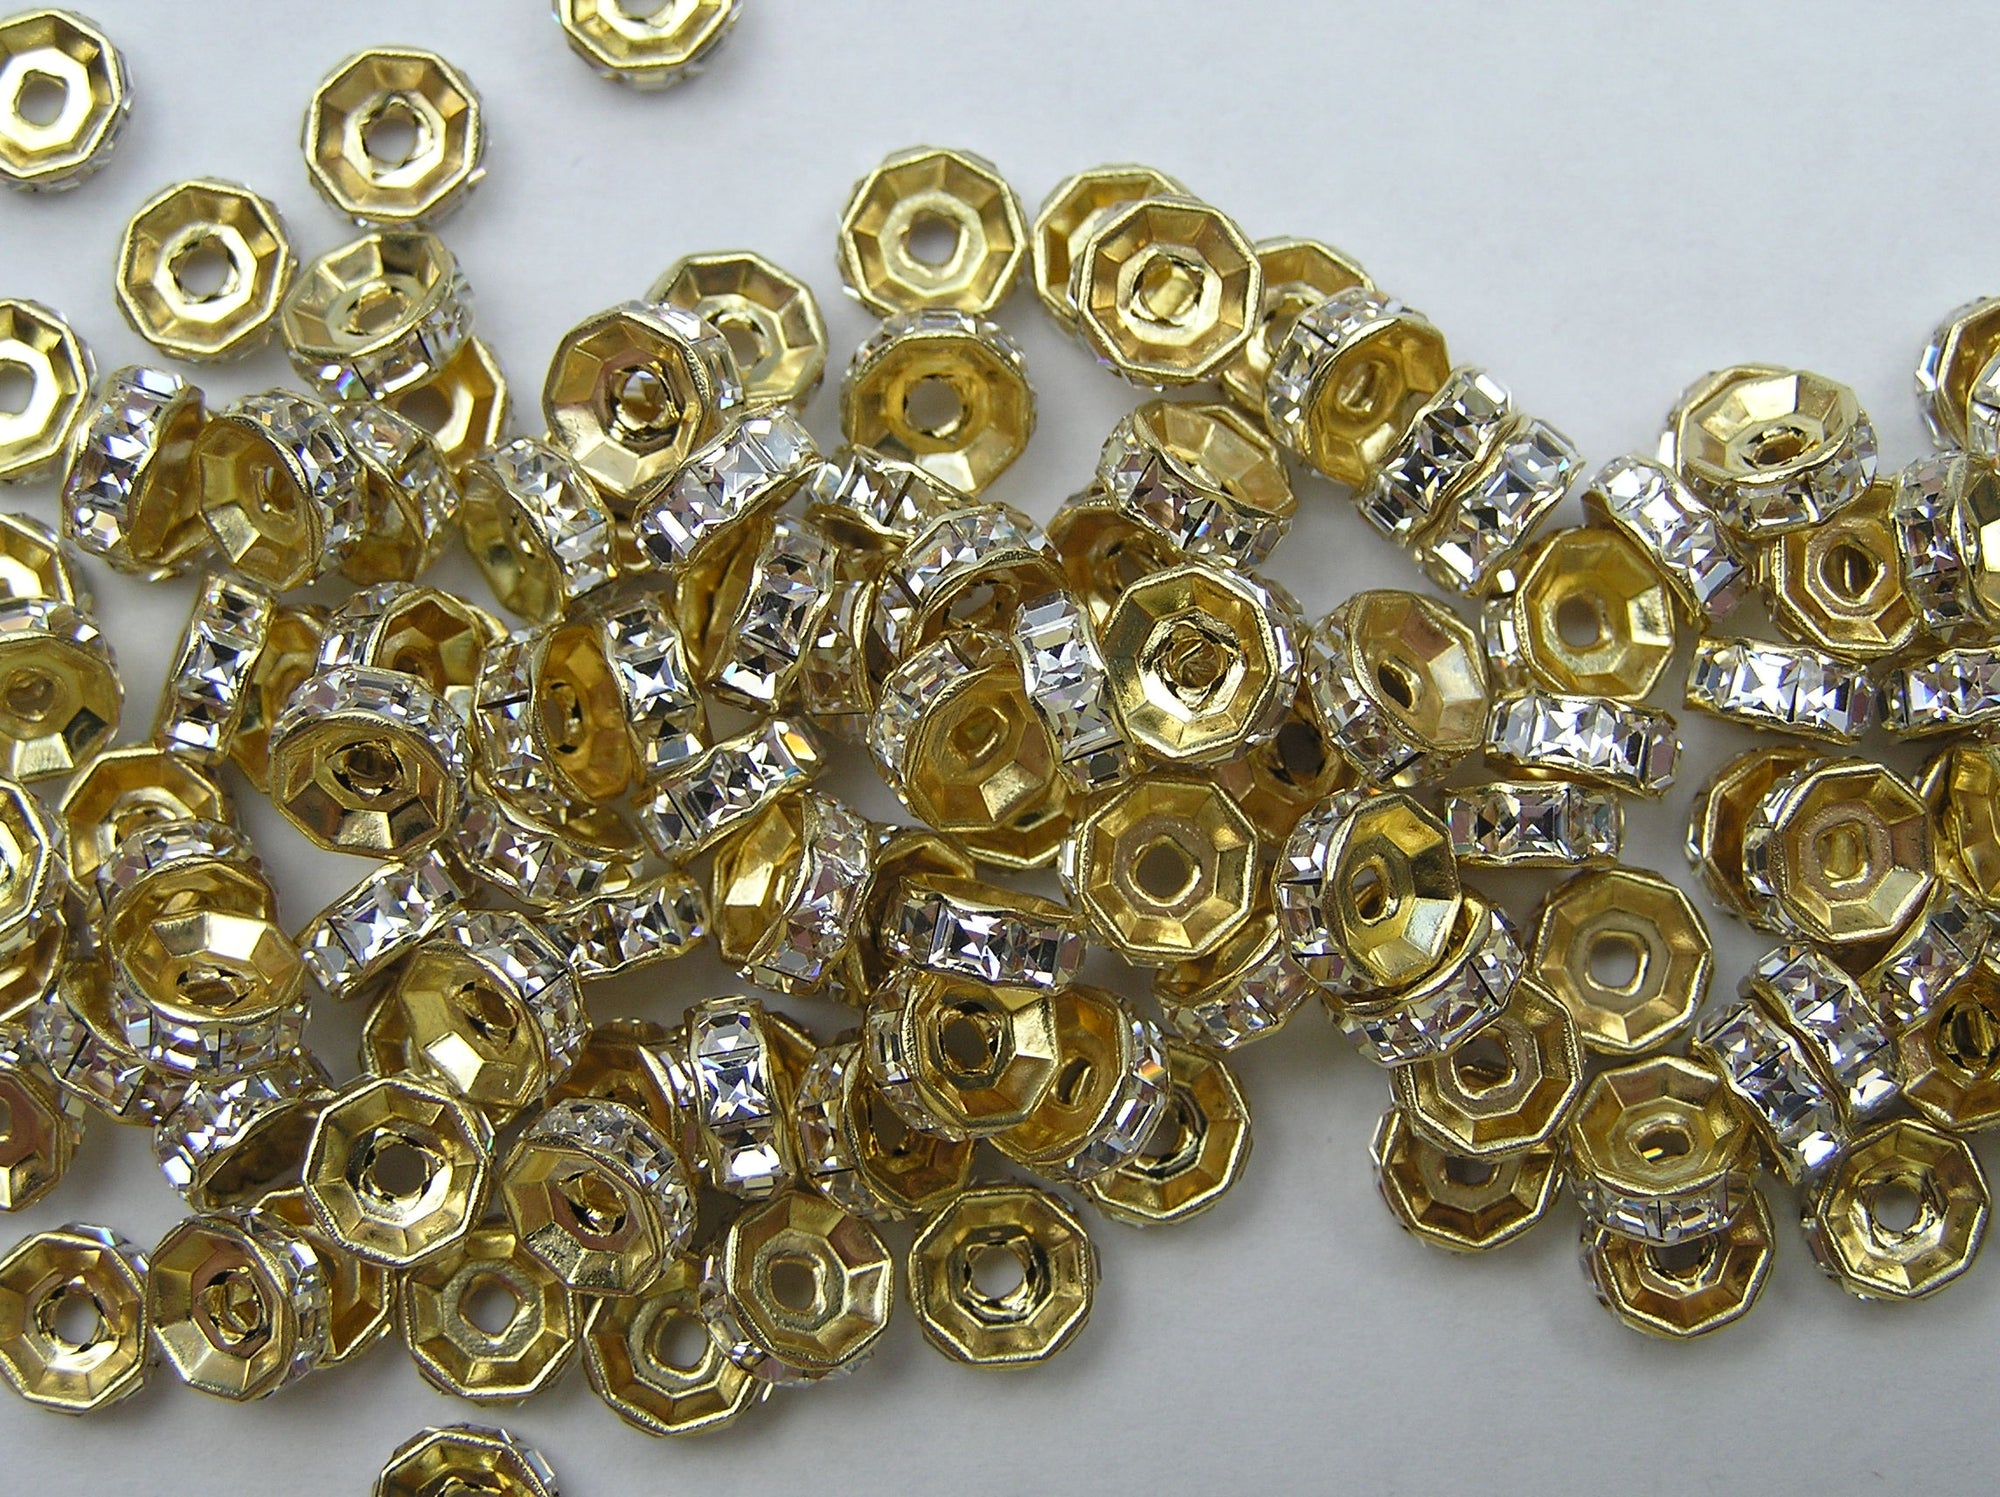 Swarovski Rhinestone Rondelles with Square Stones 6mm Crystal Clear Gold Plated 144pcs J287